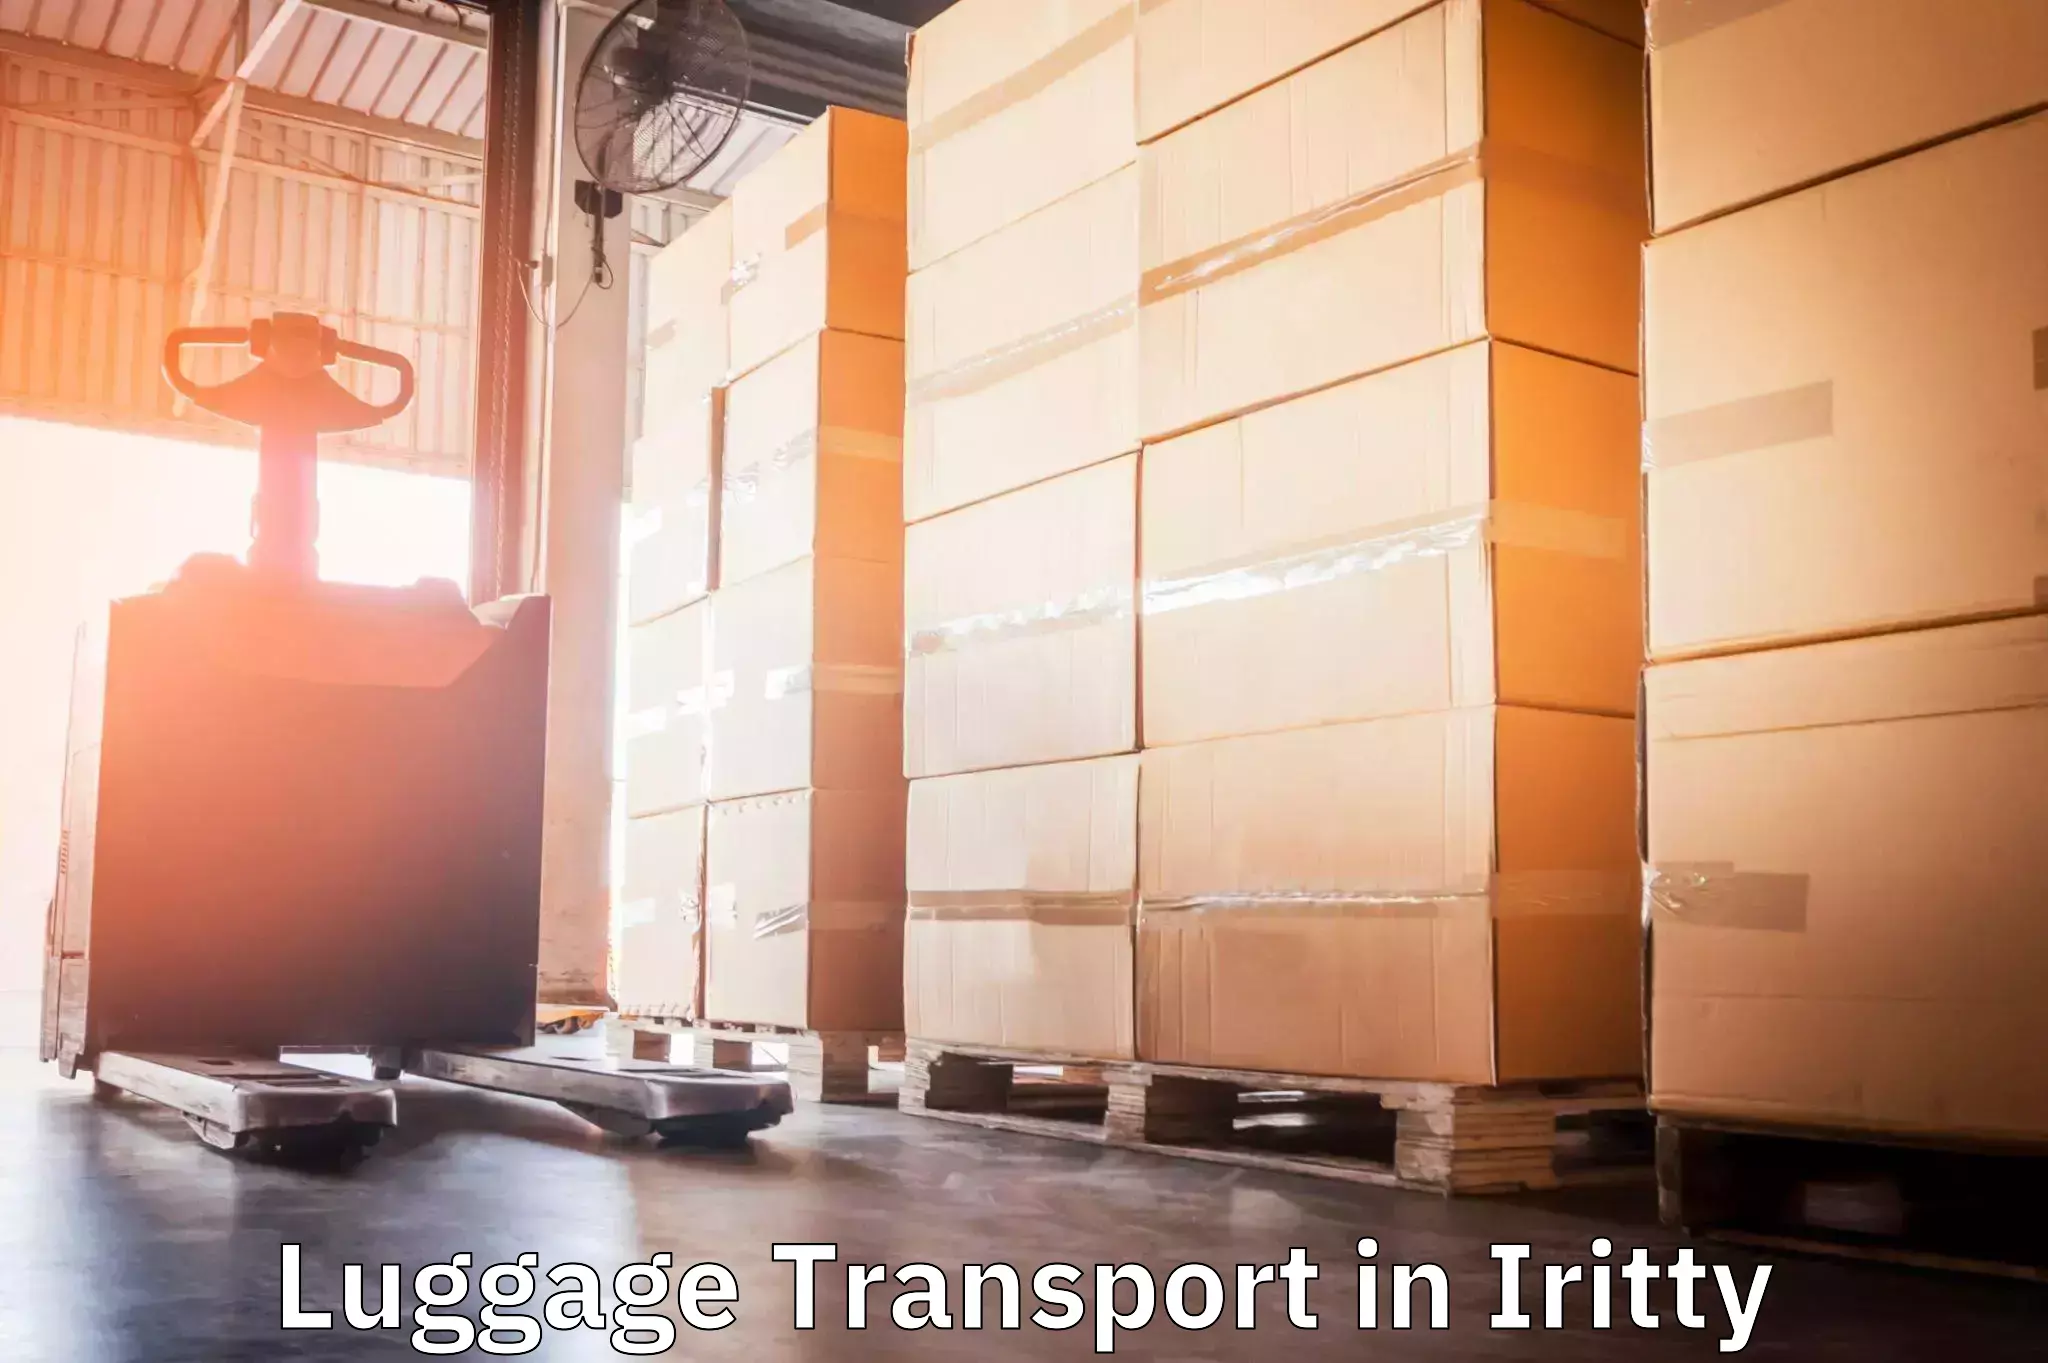 Luggage shipment tracking in Iritty